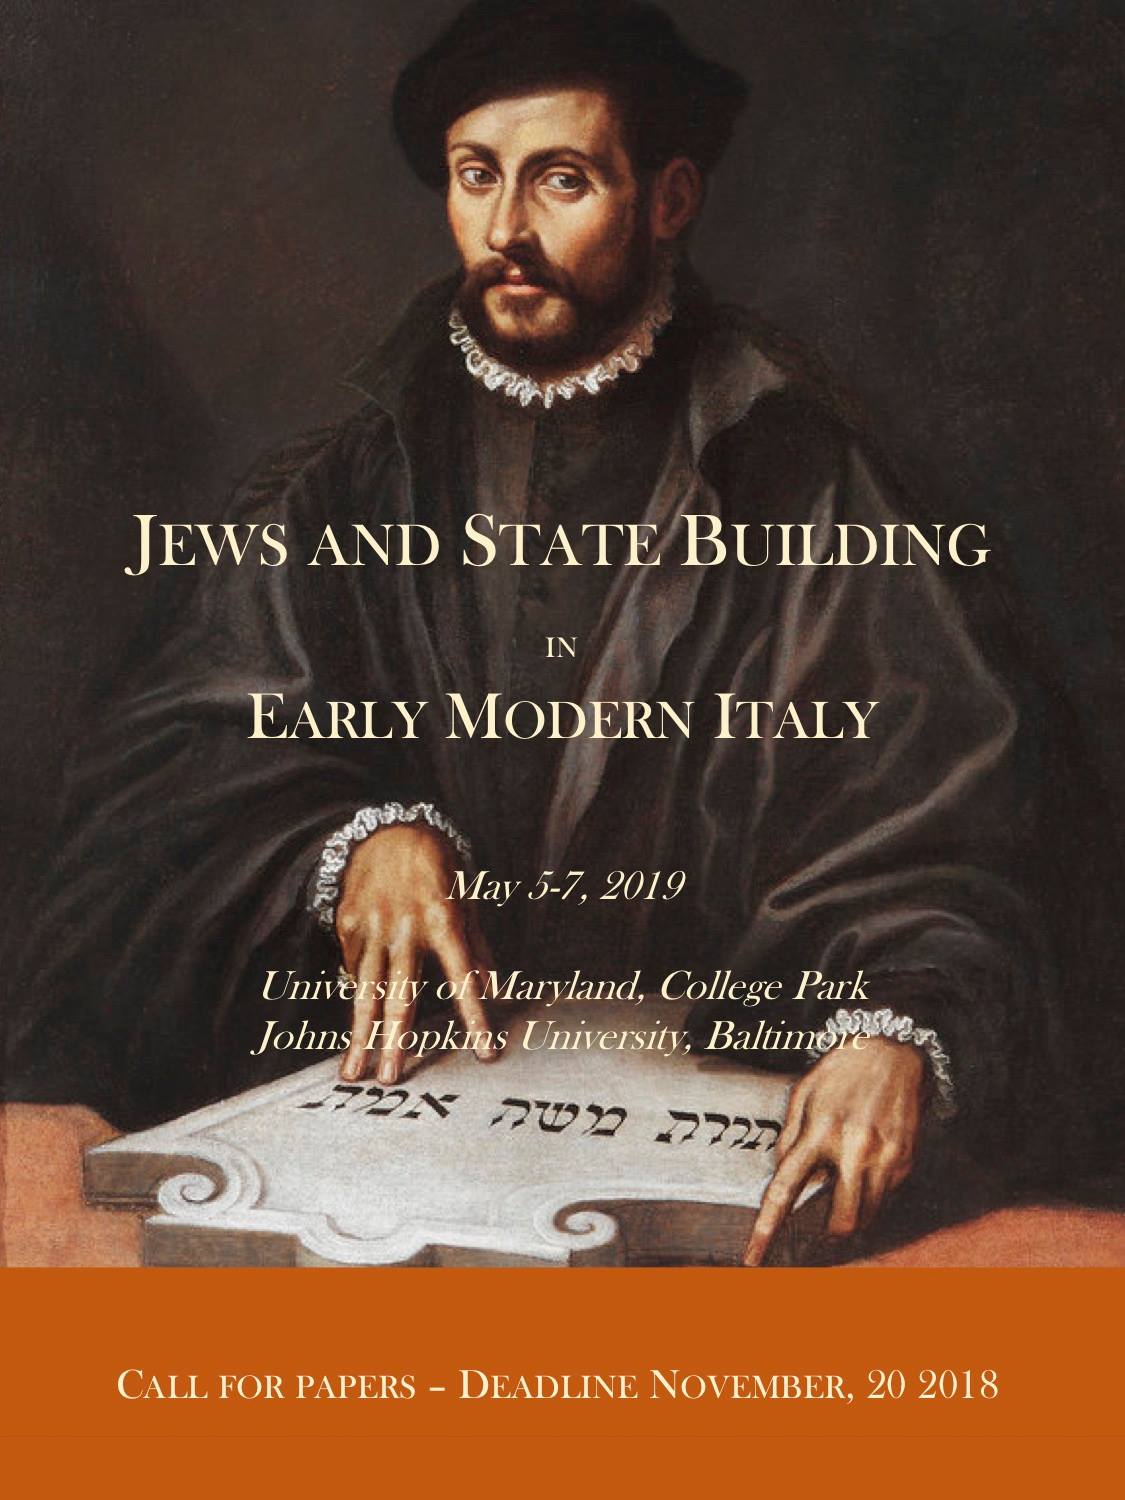 Image for event - Jews in Italy Conference Series